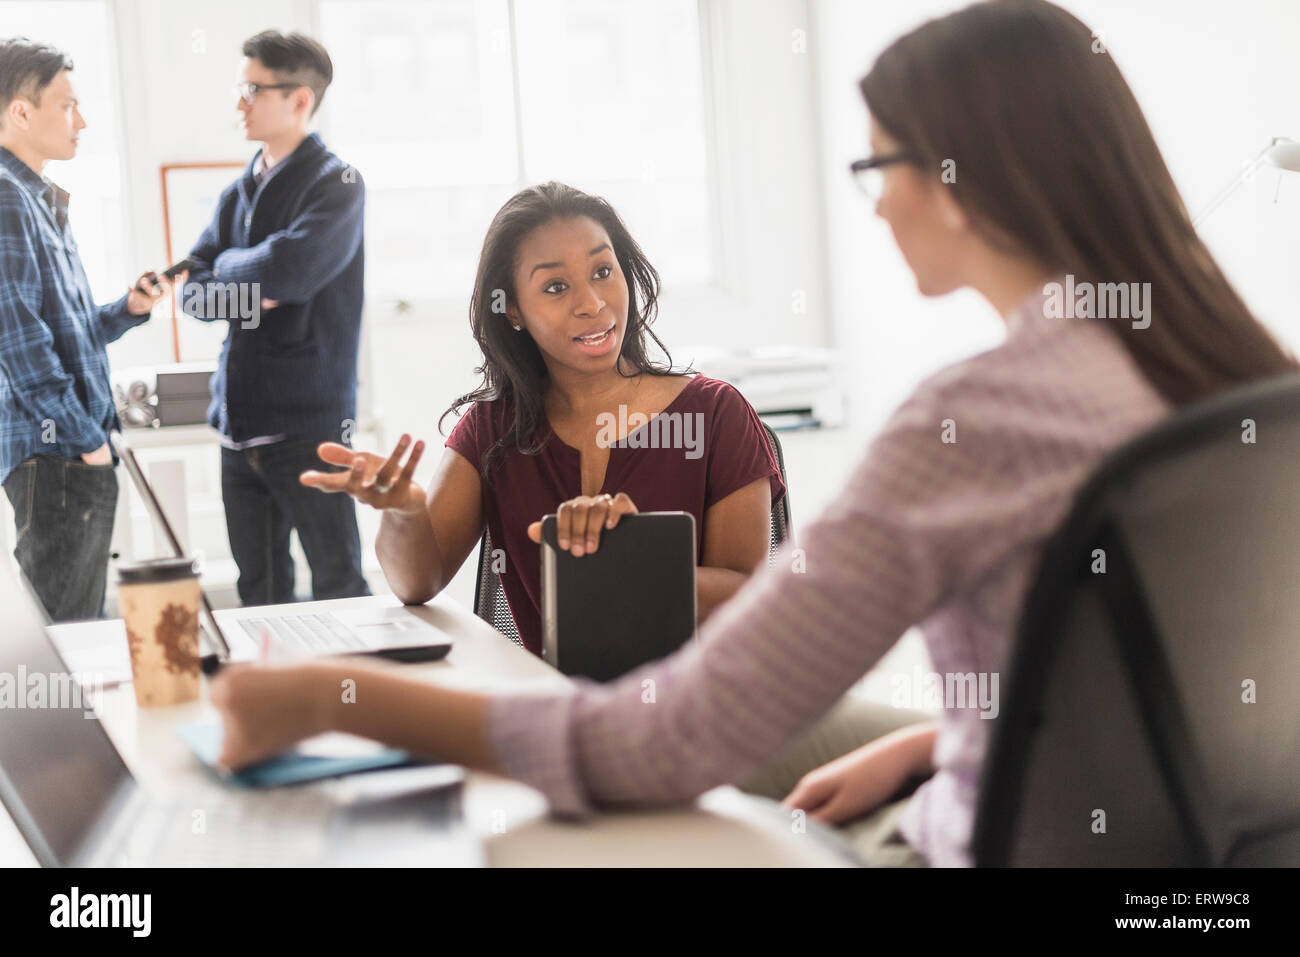 Businesswomen working together in office Stock Photo